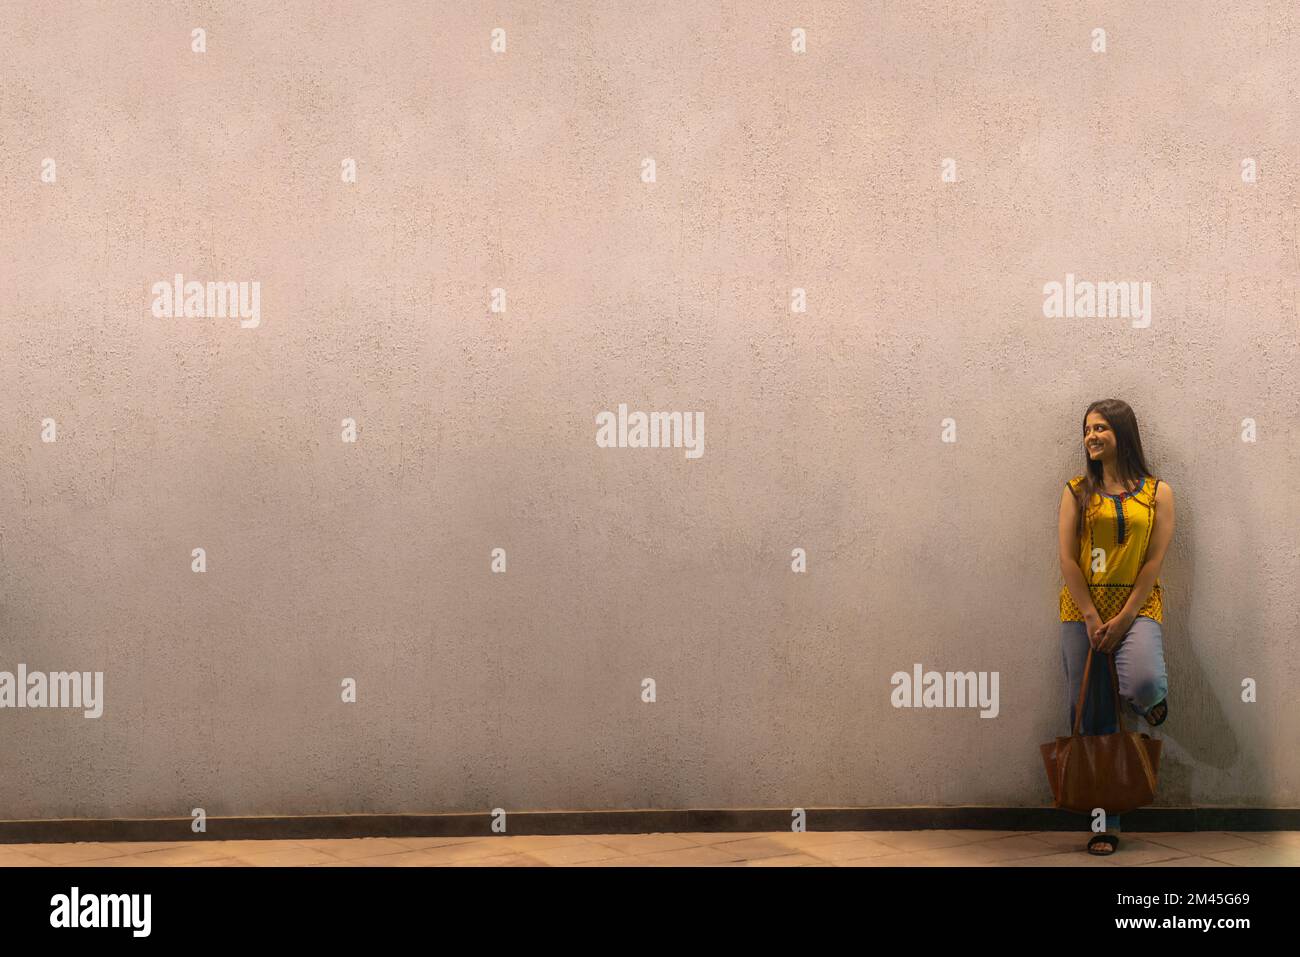 Long distance shot of an Indian woman with bag standing against wall Stock Photo